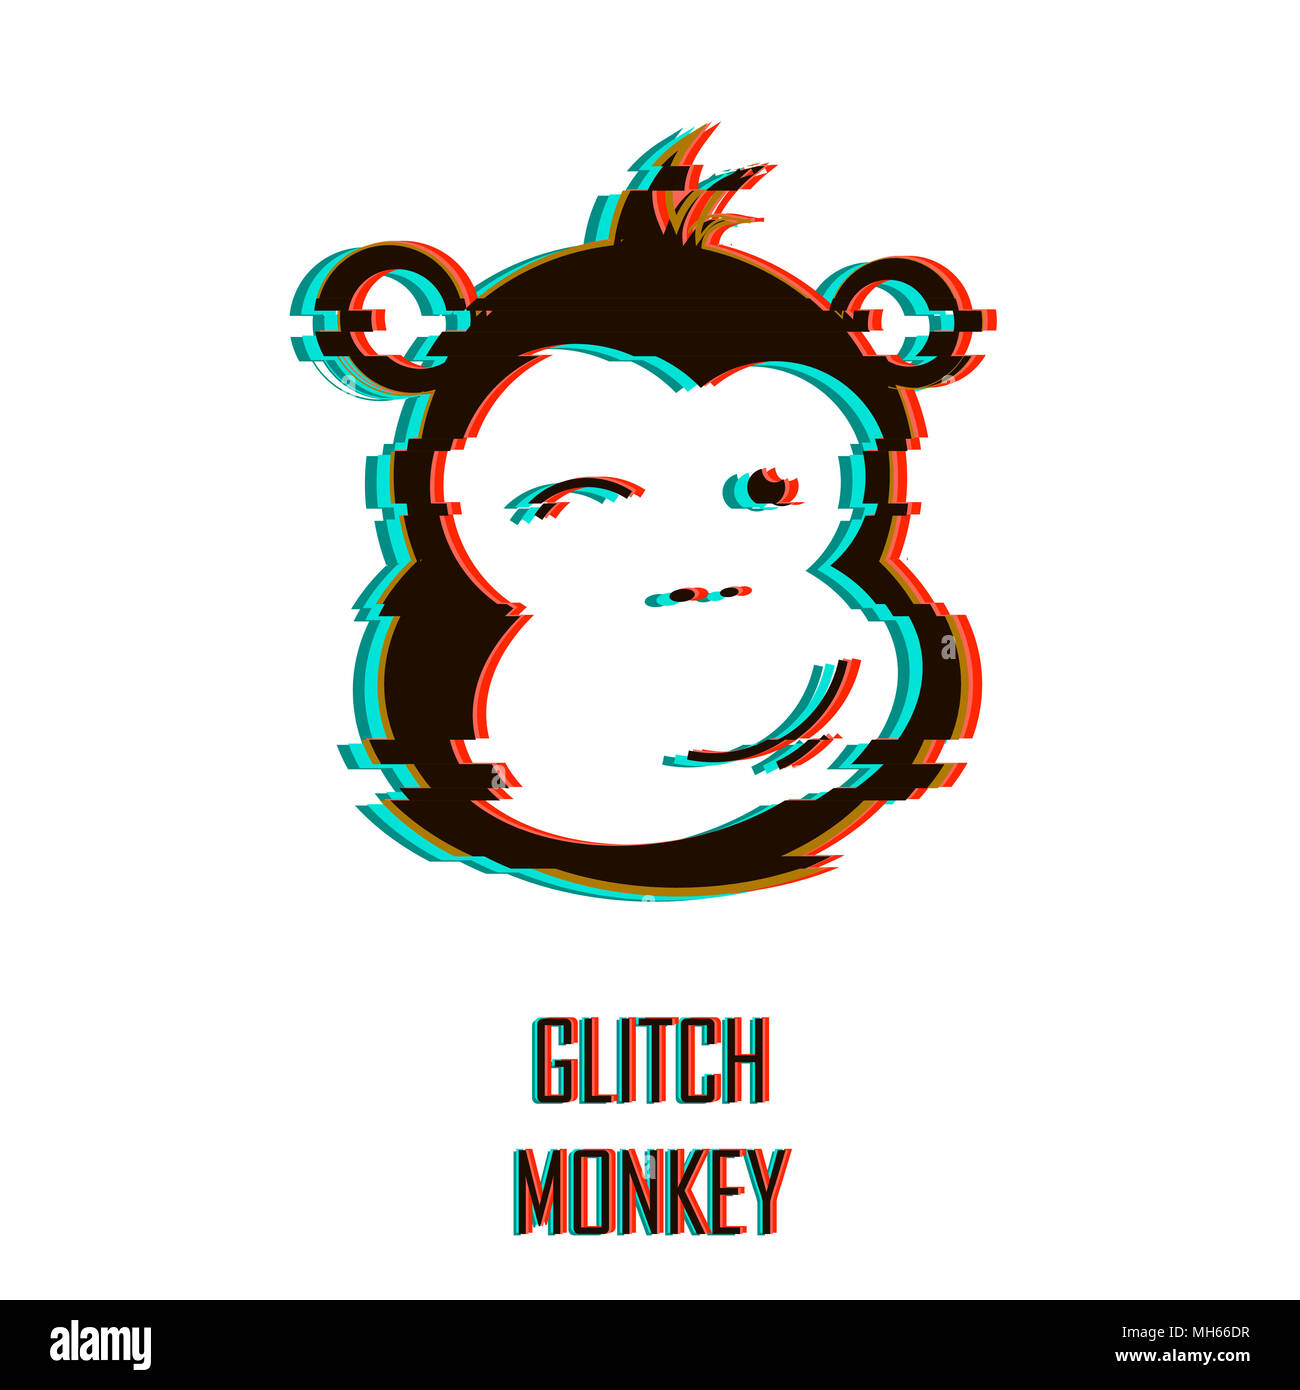 Winking monkey icon. Modern vector illustration with glitch effect. Stock Photo